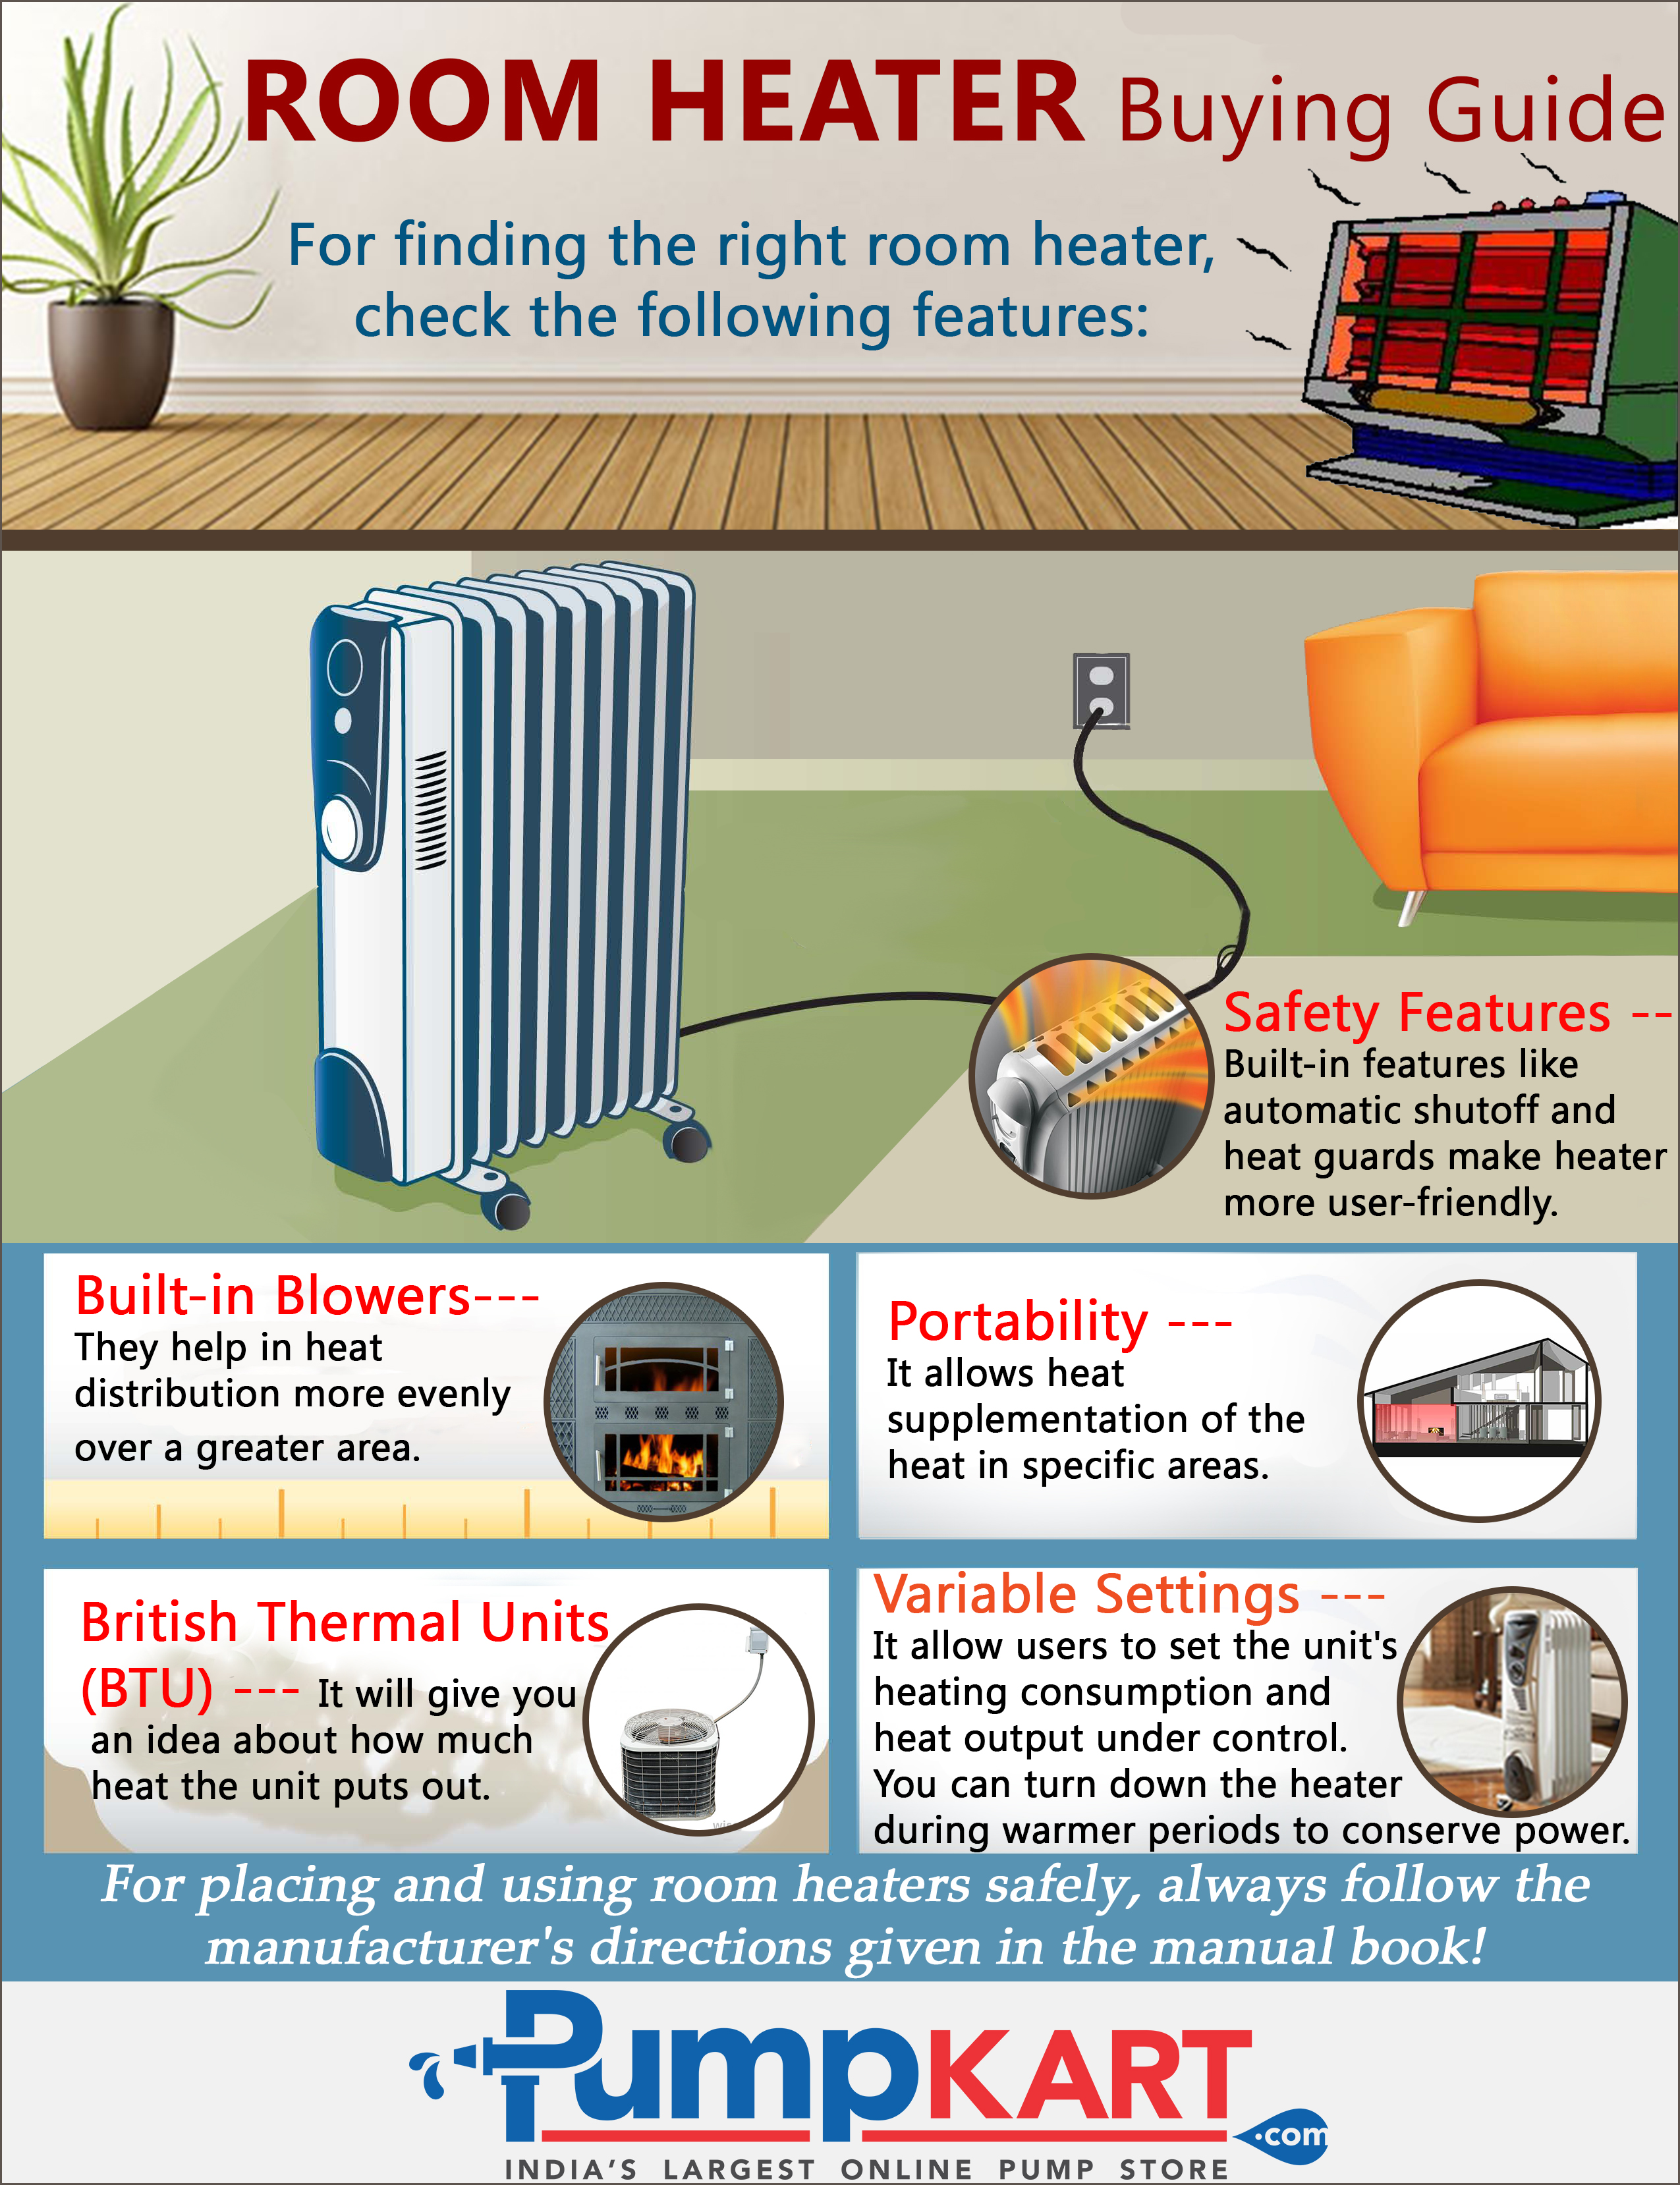 Room Heater Buying Guide: Points to ponder before buying one